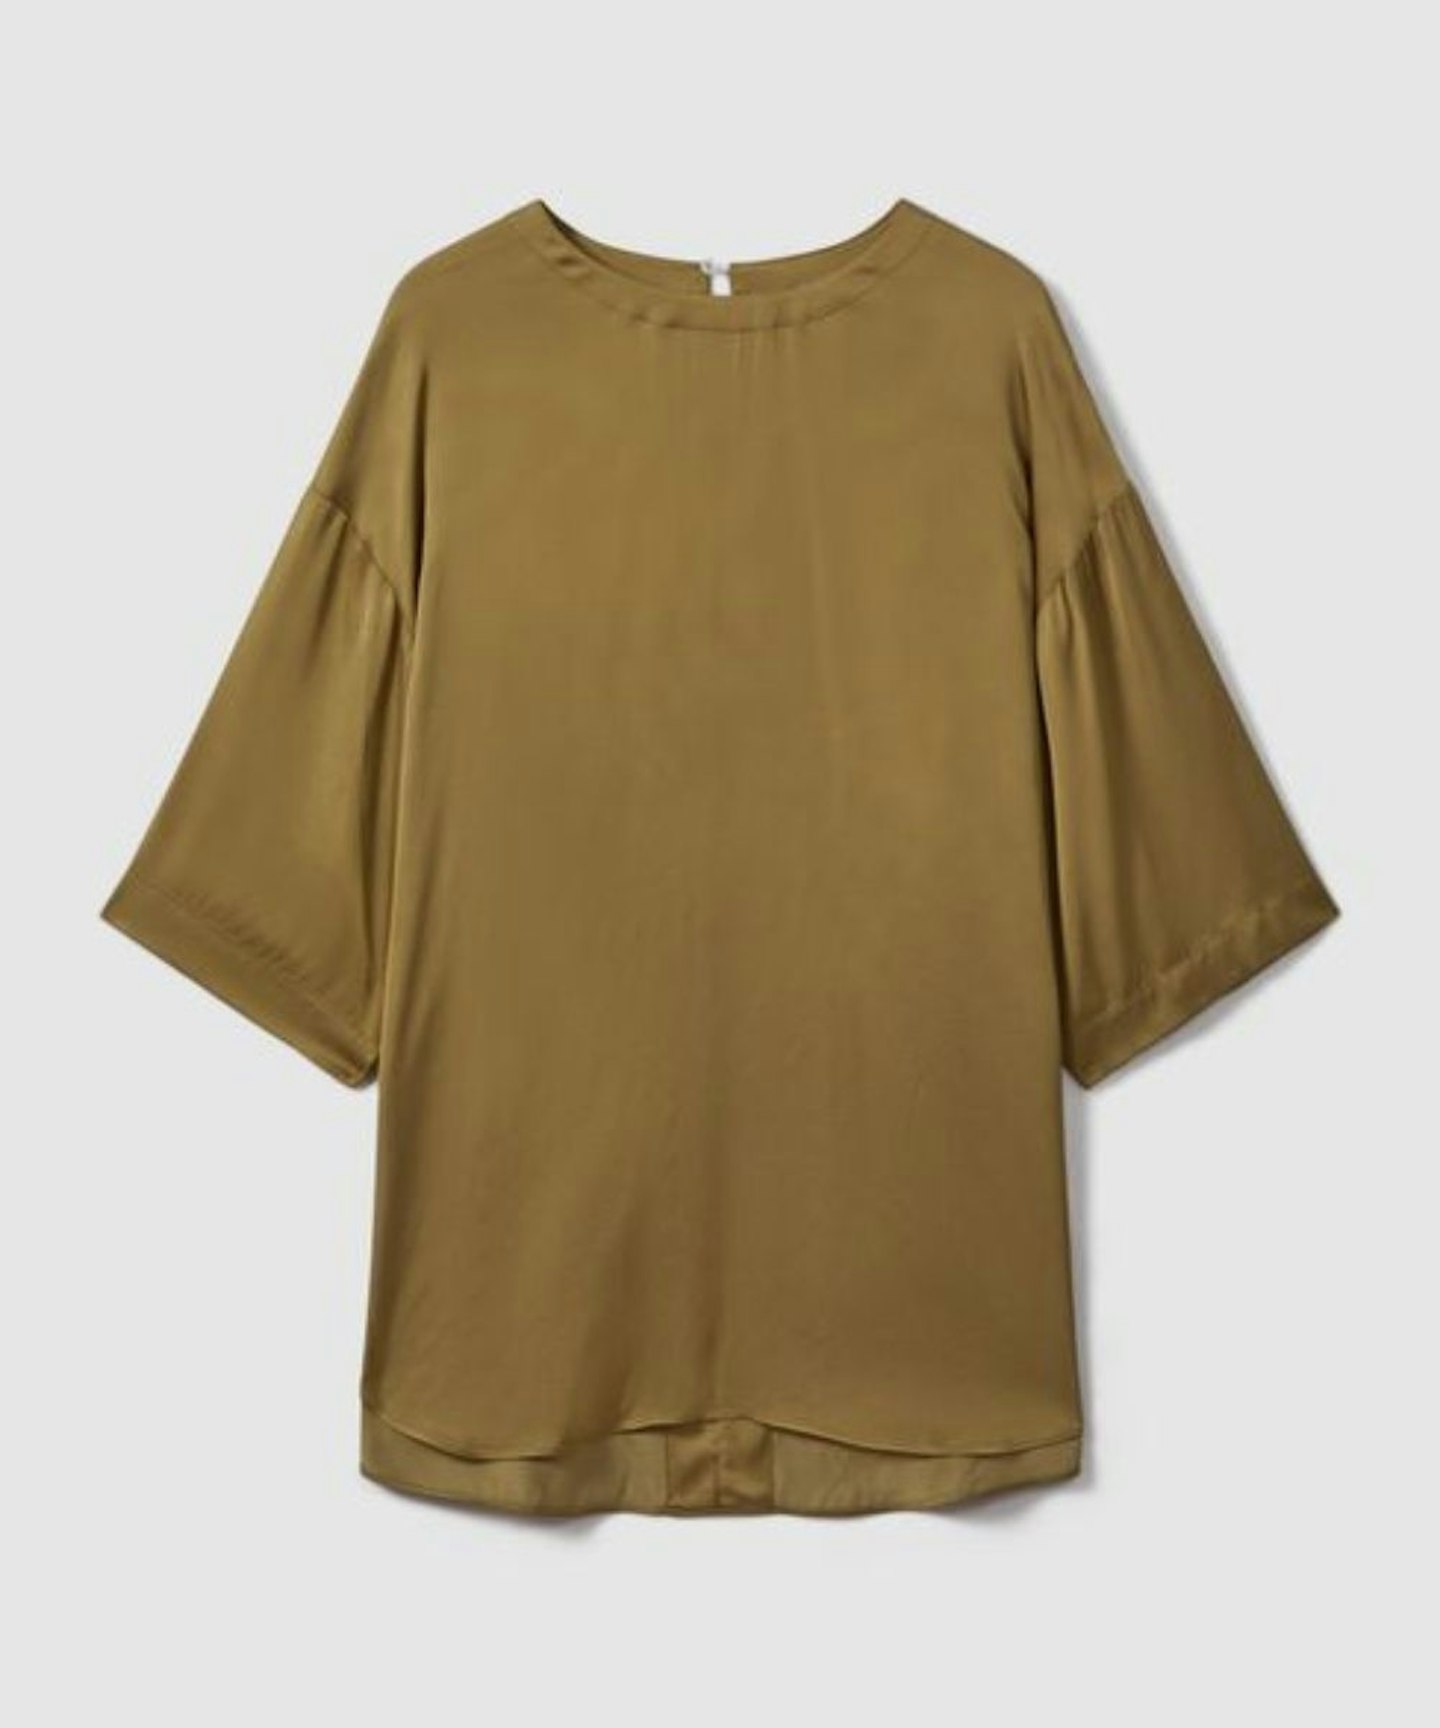 Reiss, Anya Relaxed Satin Blouse